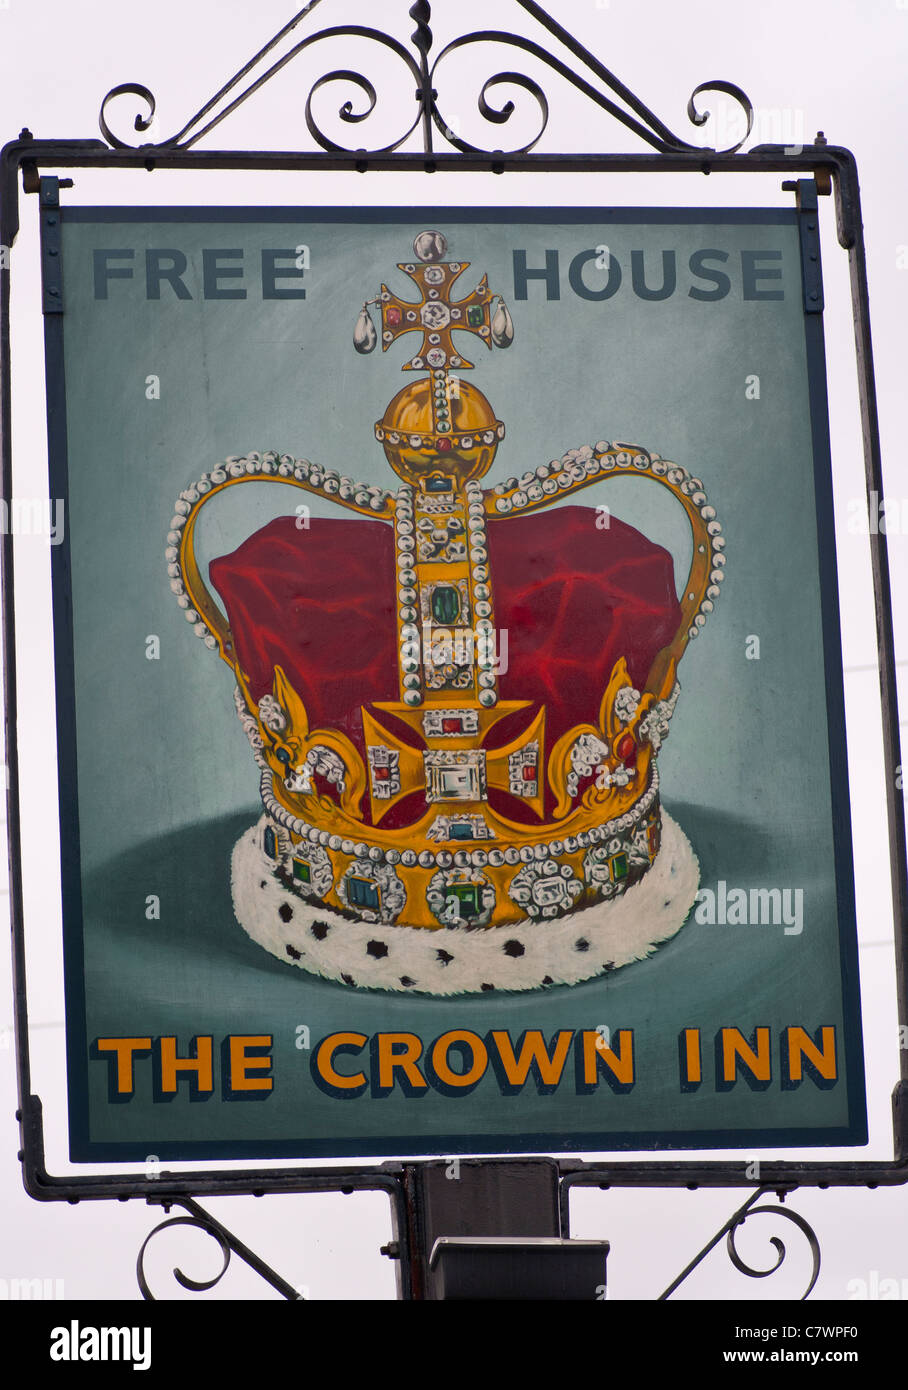 The Crown Inn Pub Sign UK Pubs Signs Free House Stock Photo